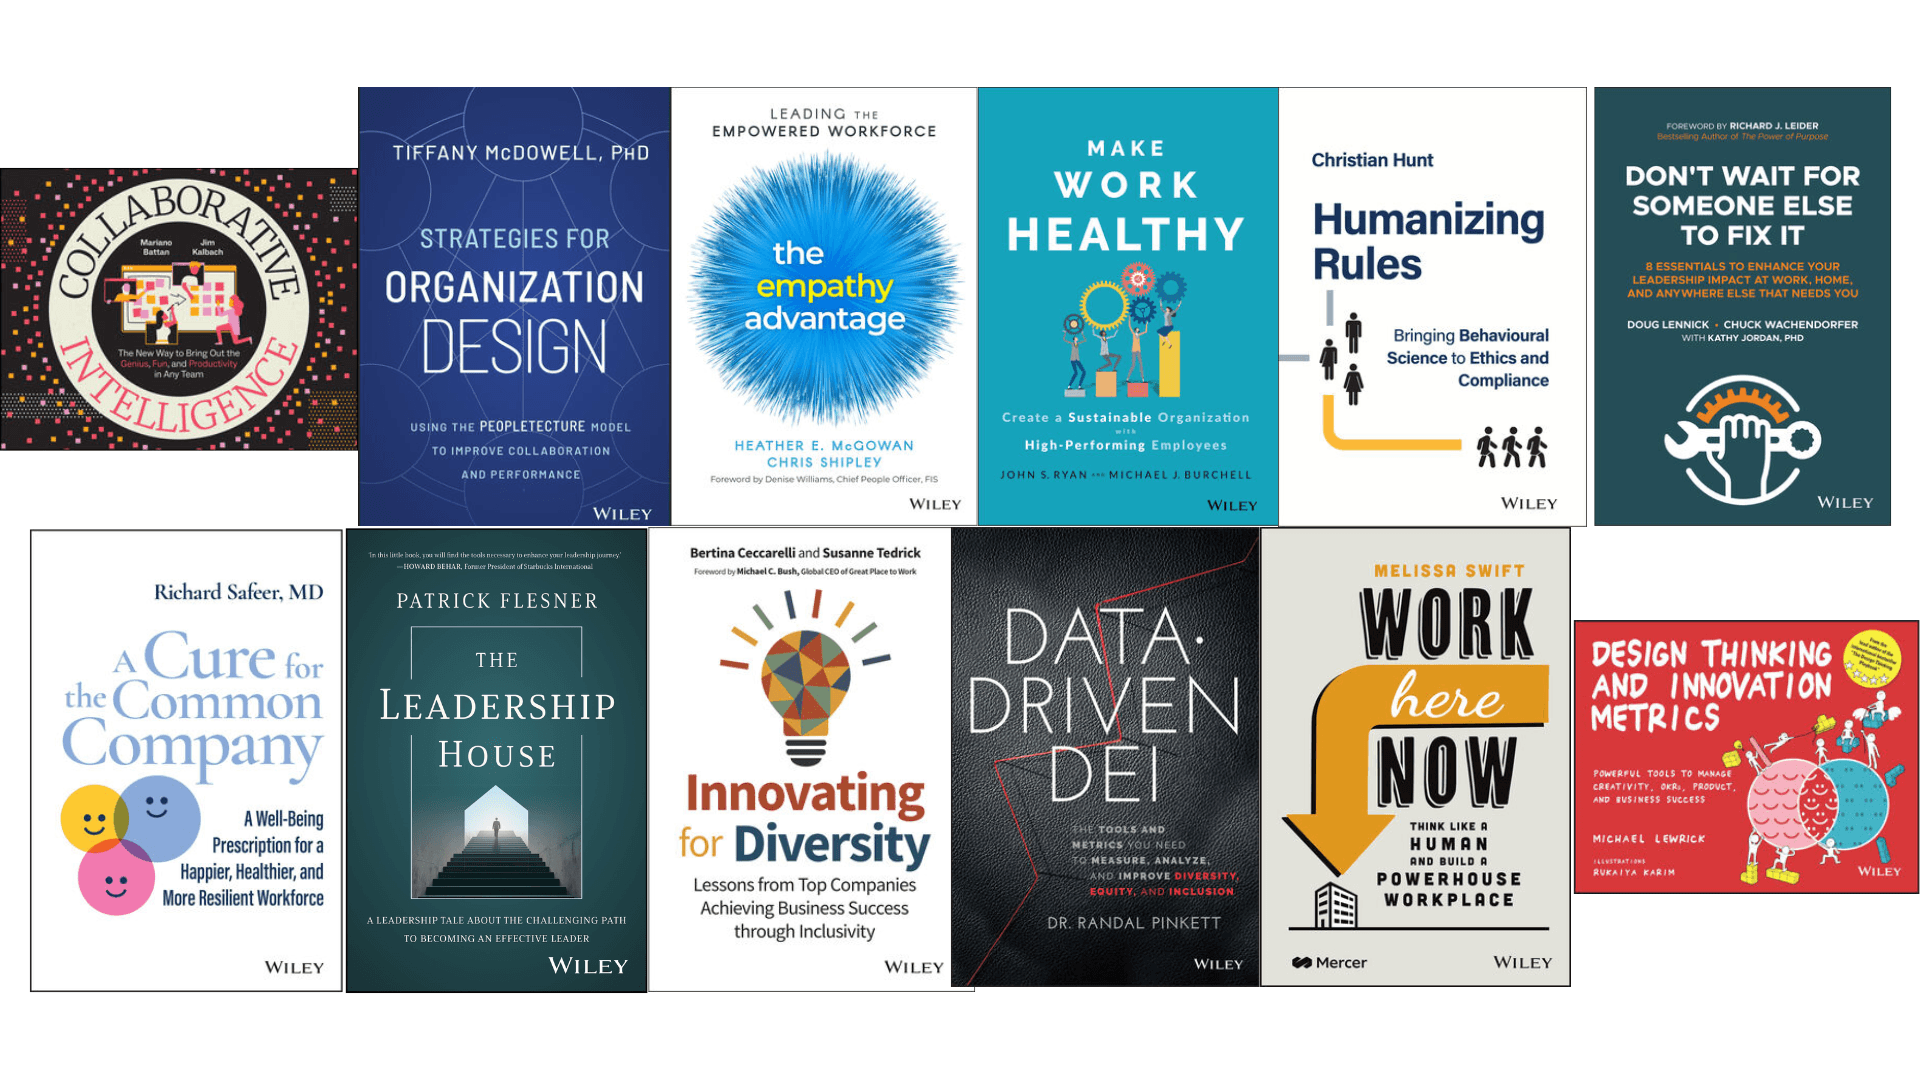 The Leadership And Professional Development Books By Wiley For Businesses, Individuals, And Corporates